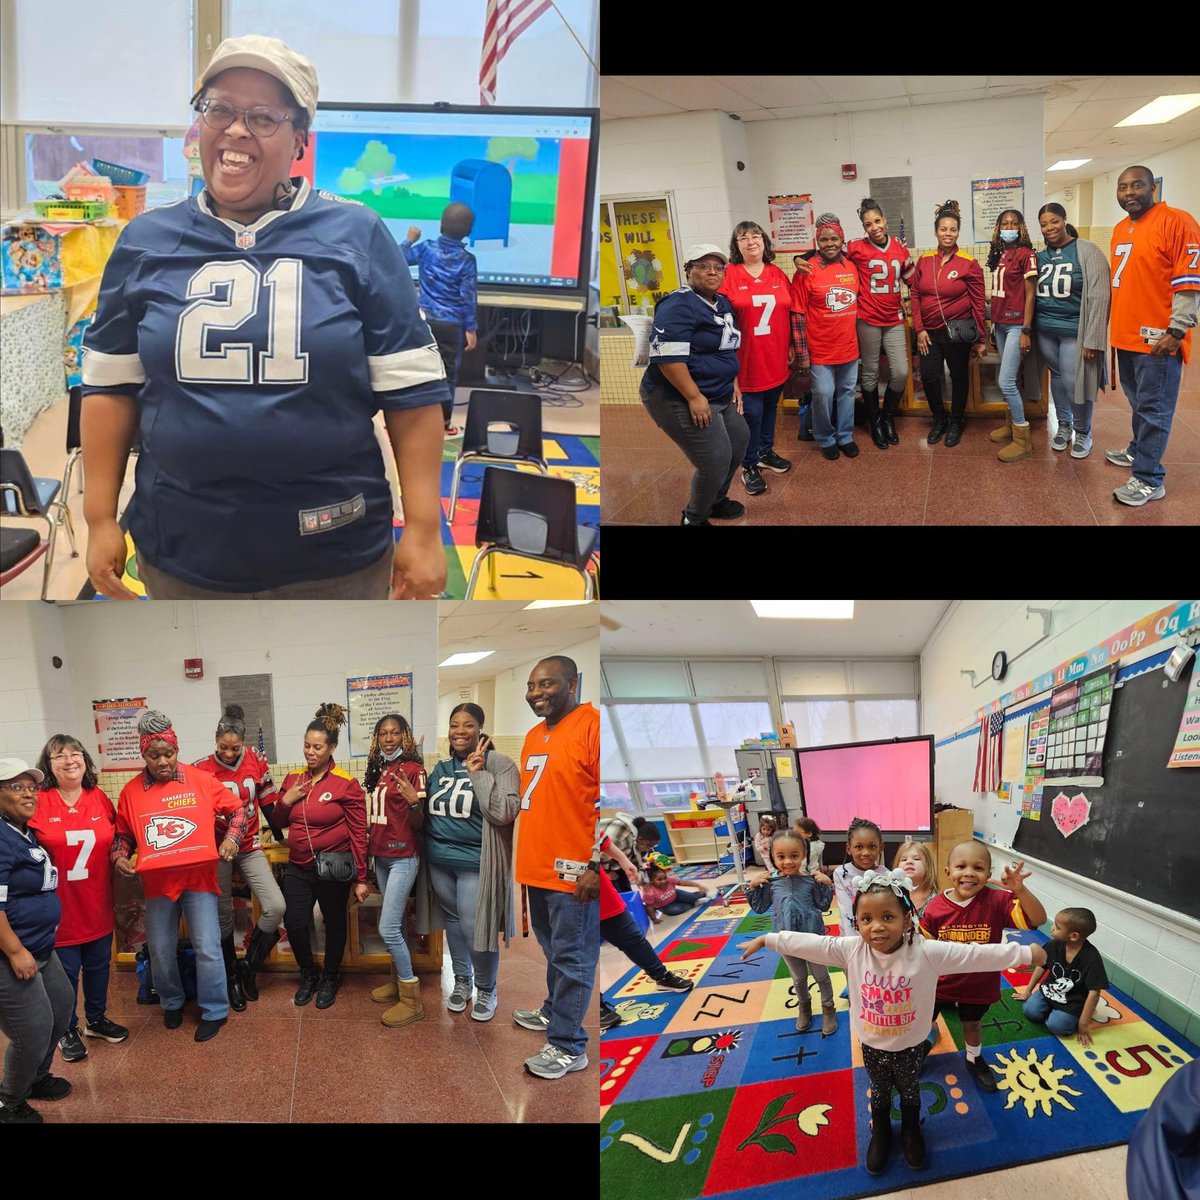 ARE YOU READY FOR SOME FOOTBALL!!! It’s Super Bowl Sunday! Check out Mt Hermon Staff & Students in their football attire on Friday! @hermon_pc @PortsVASchools @cardellpatillo @ebracyPPS